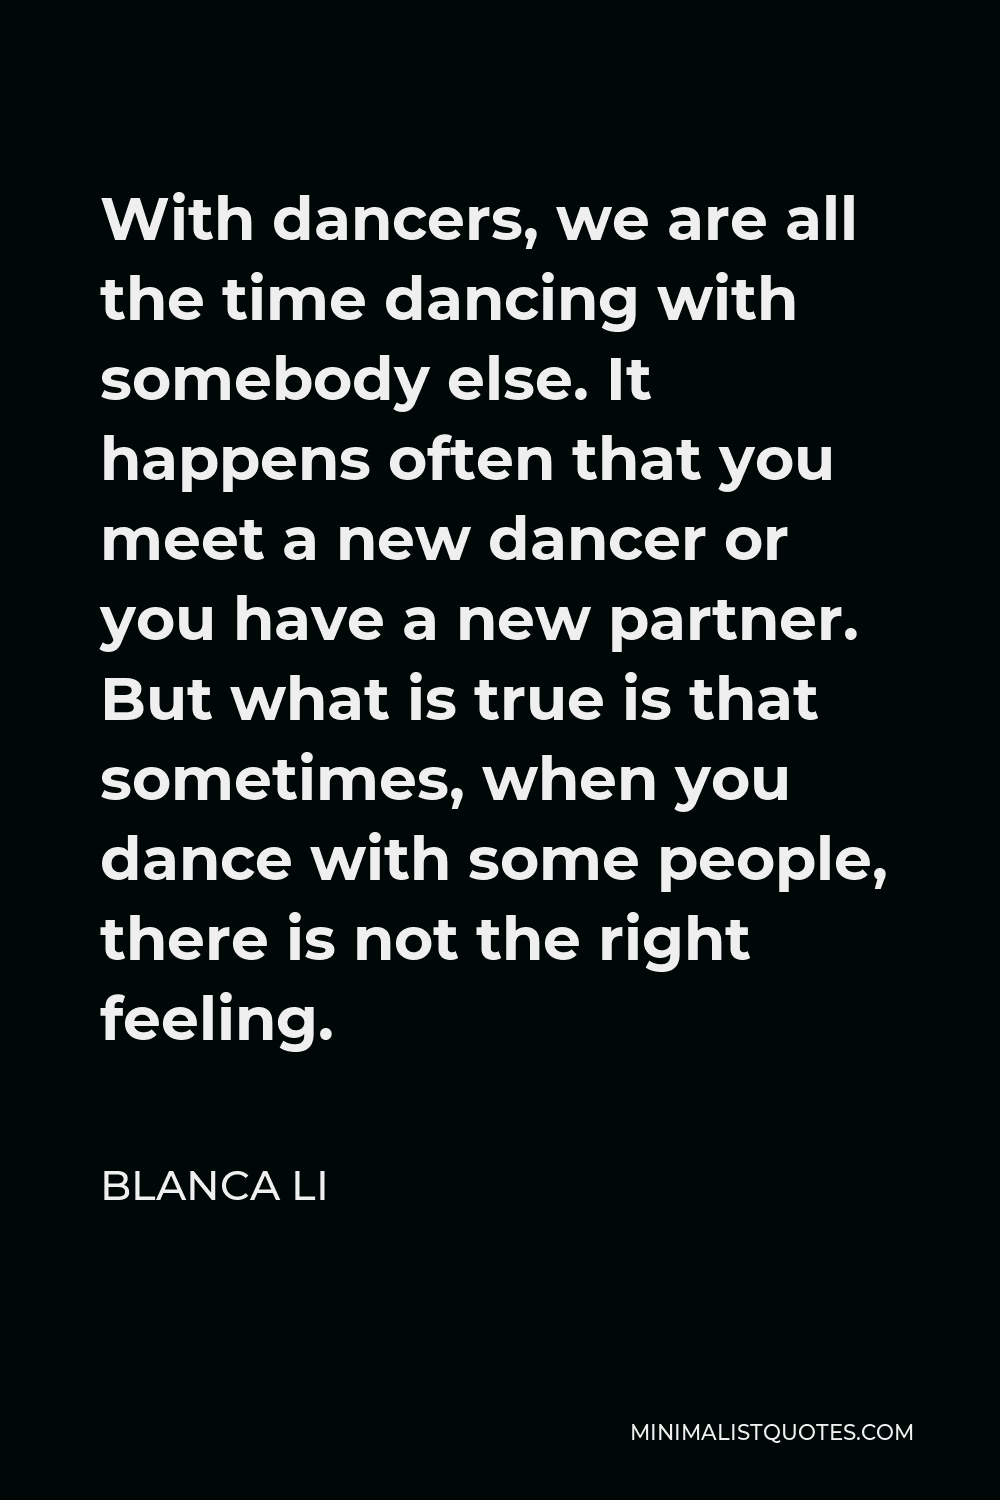 Blanca Li Quote - With dancers, we are all the time dancing with somebody else. It happens often that you meet a new dancer or you have a new partner. But what is true is that sometimes, when you dance with some people, there is not the right feeling.